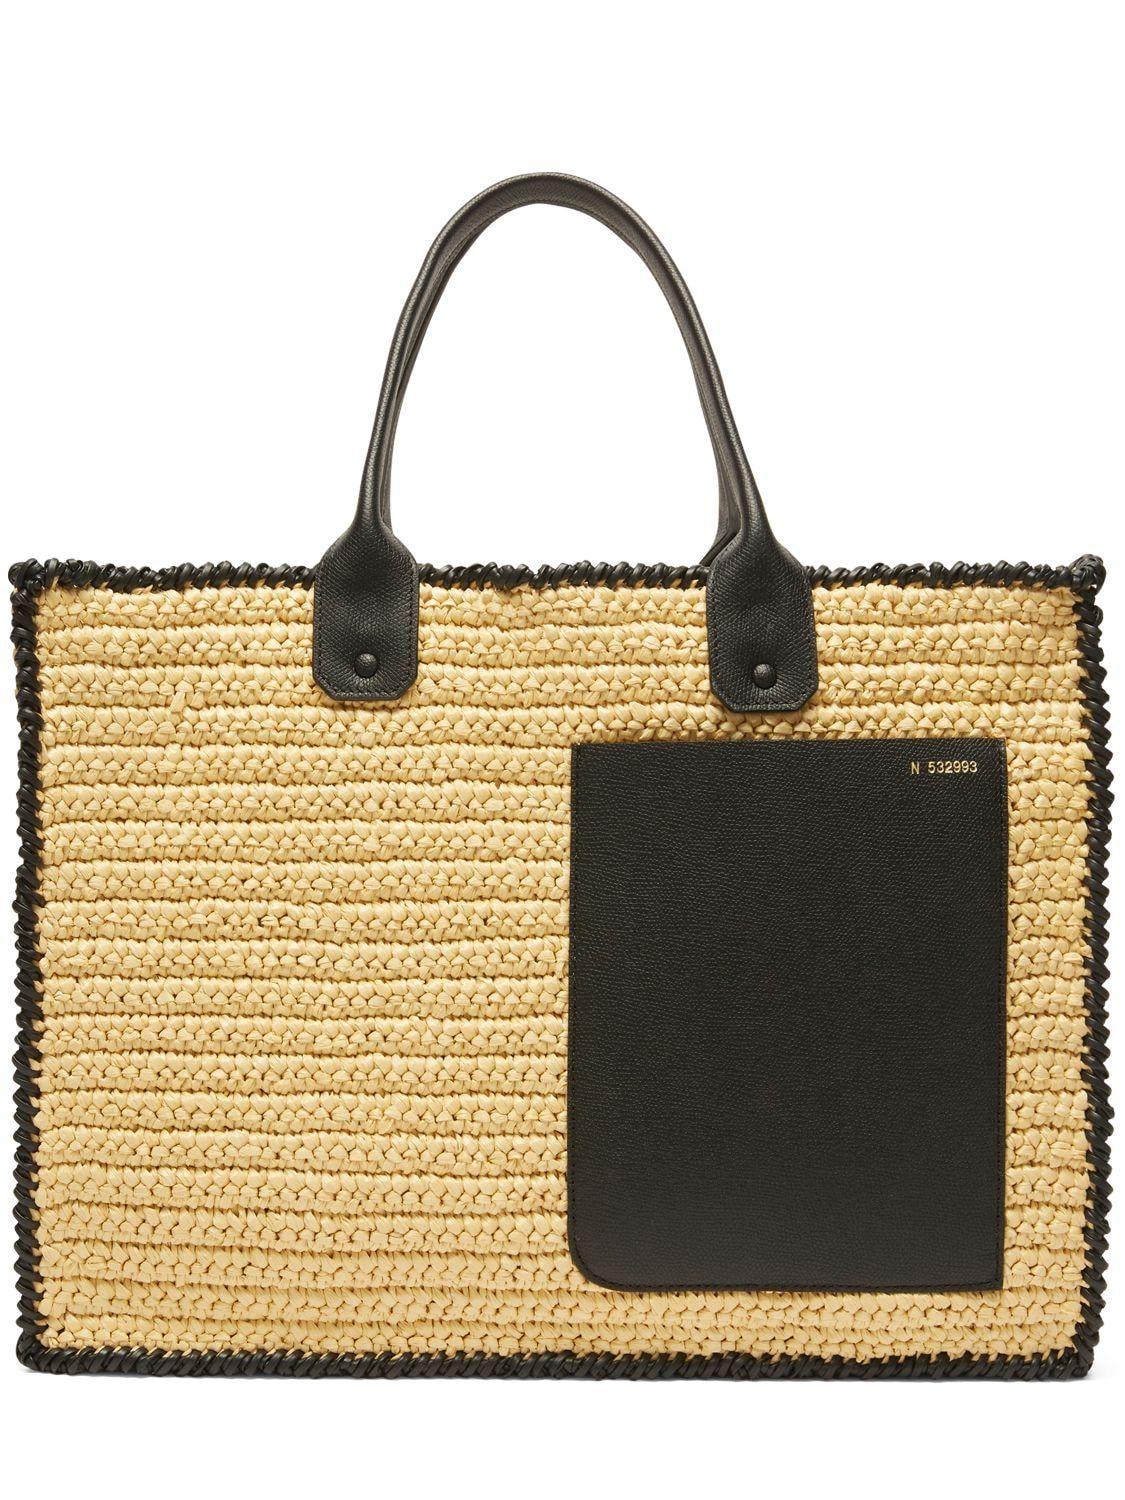 Valextra Large Raffia Shopping Tote Bag in Black | Lyst